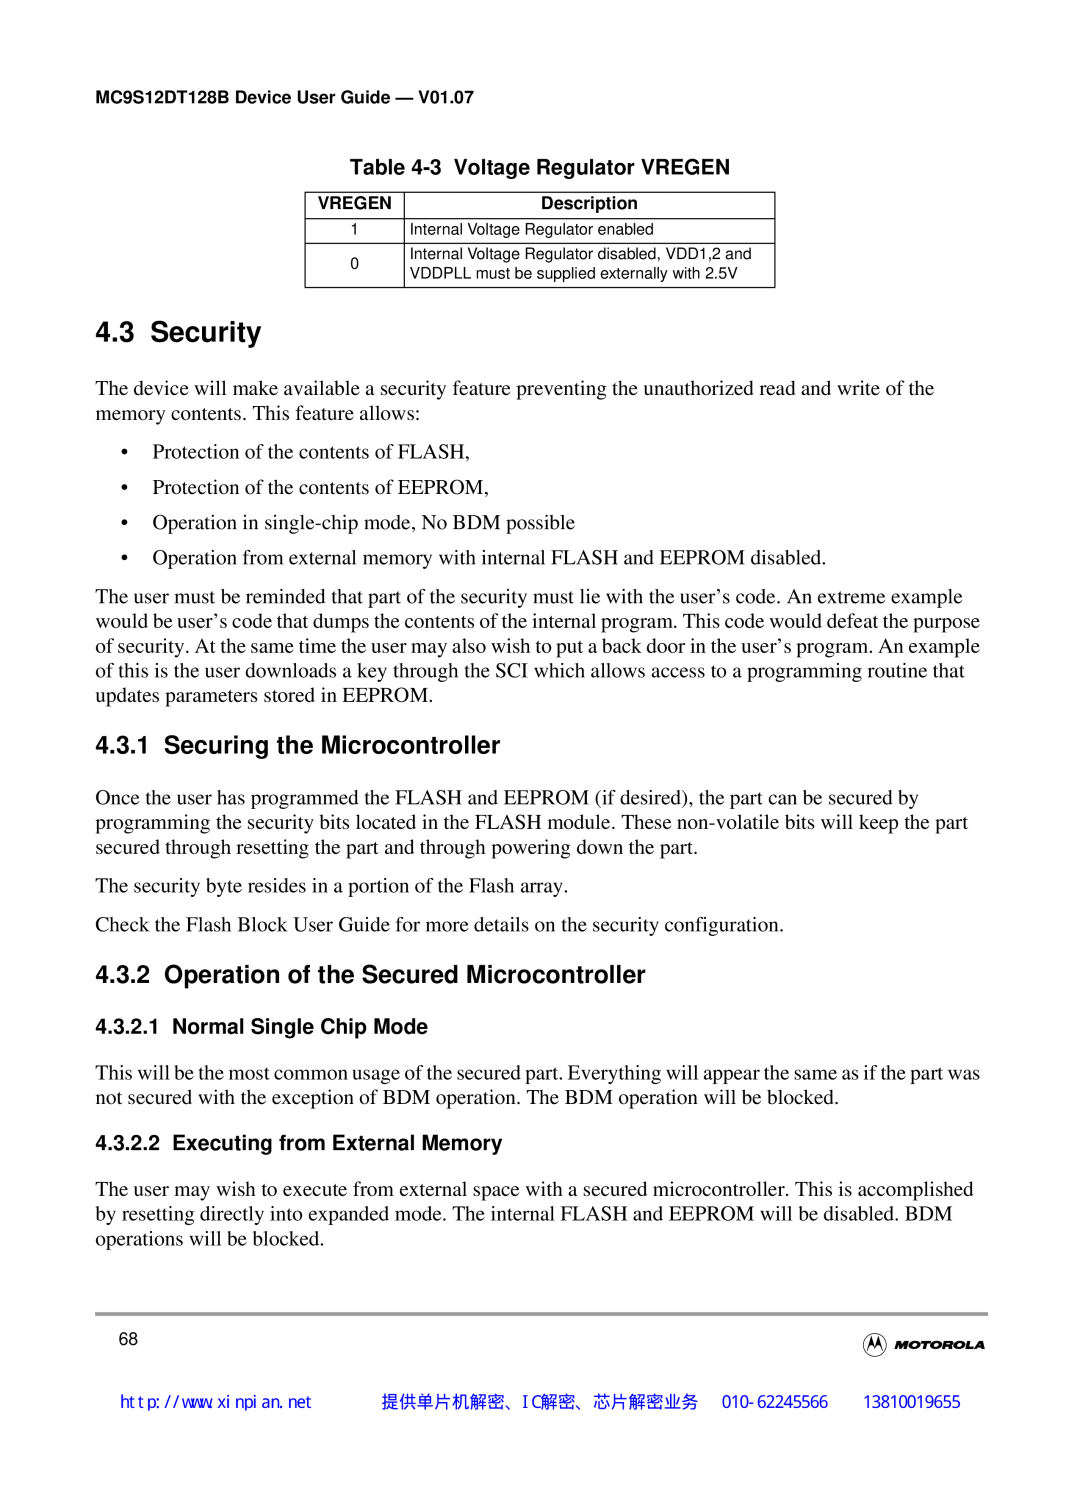 Motorola MC9S12DT128B, MC9S12DB128B manual Security, Securing the Microcontroller, Operation of the Secured Microcontroller 